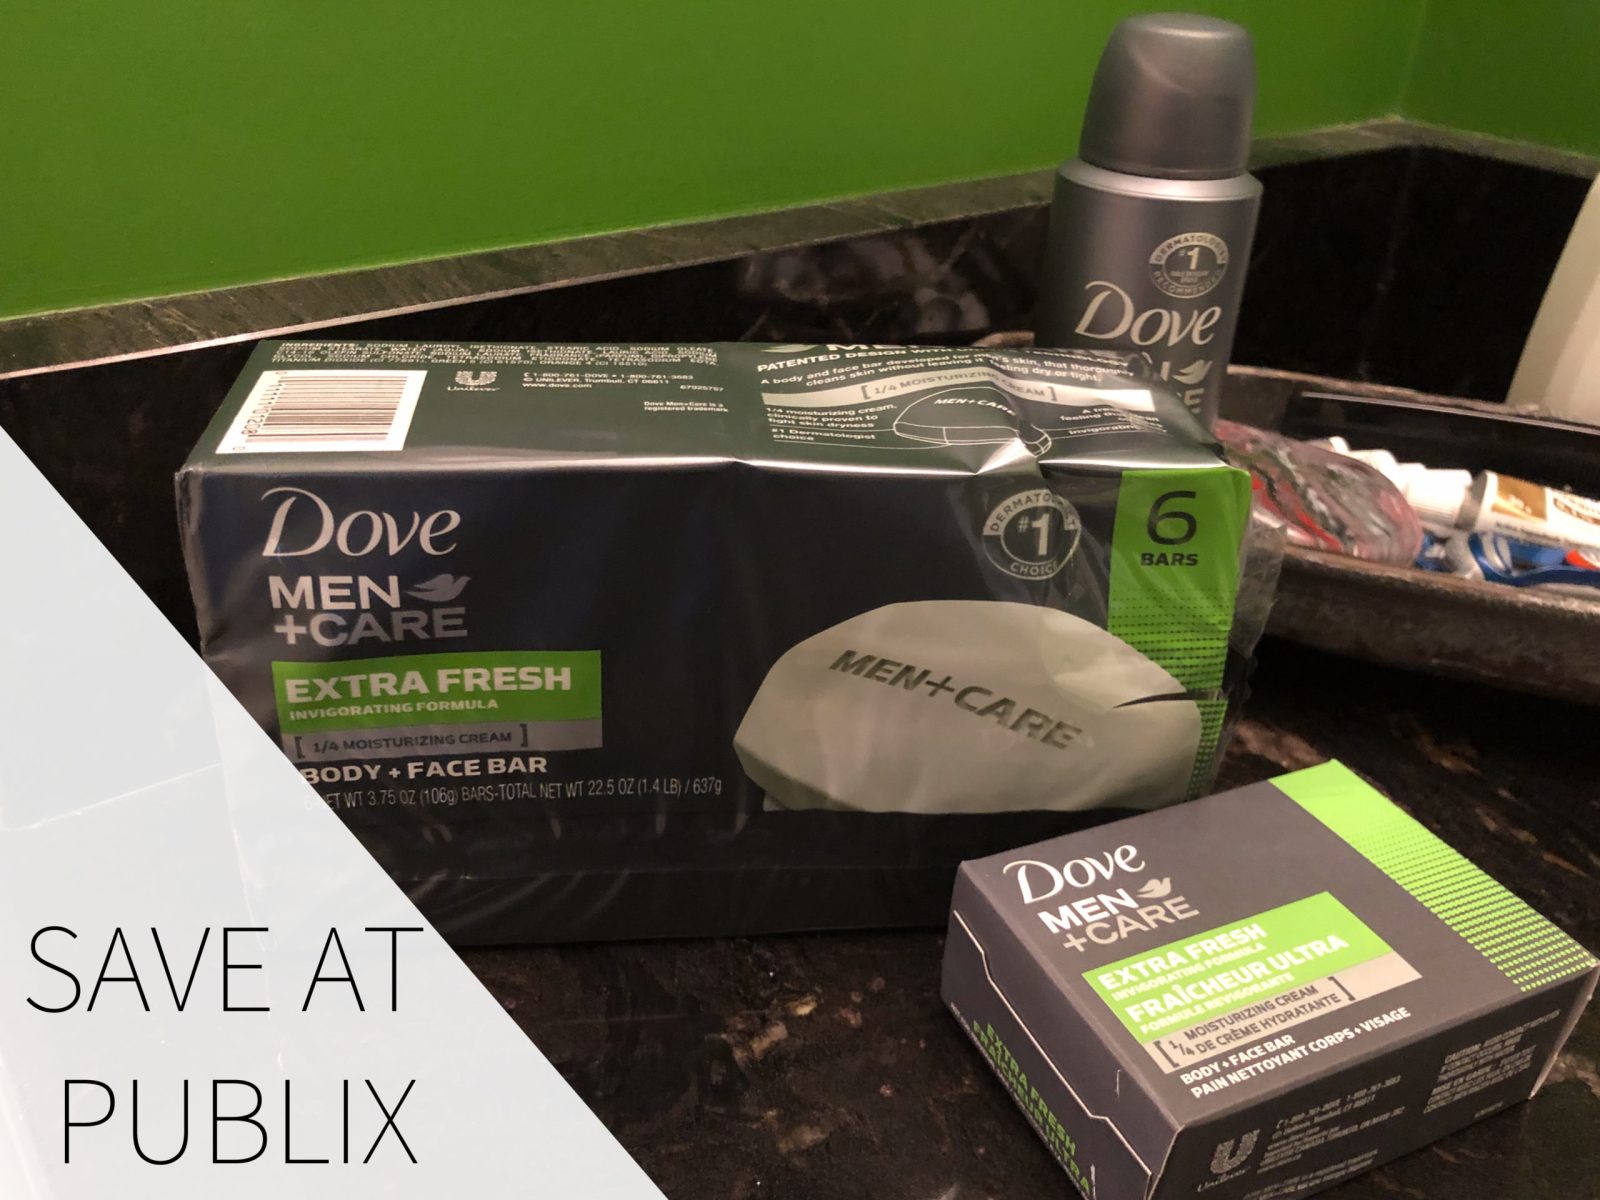 Restock Your Family’s Personal Care Products And Get Great Savings At Publix